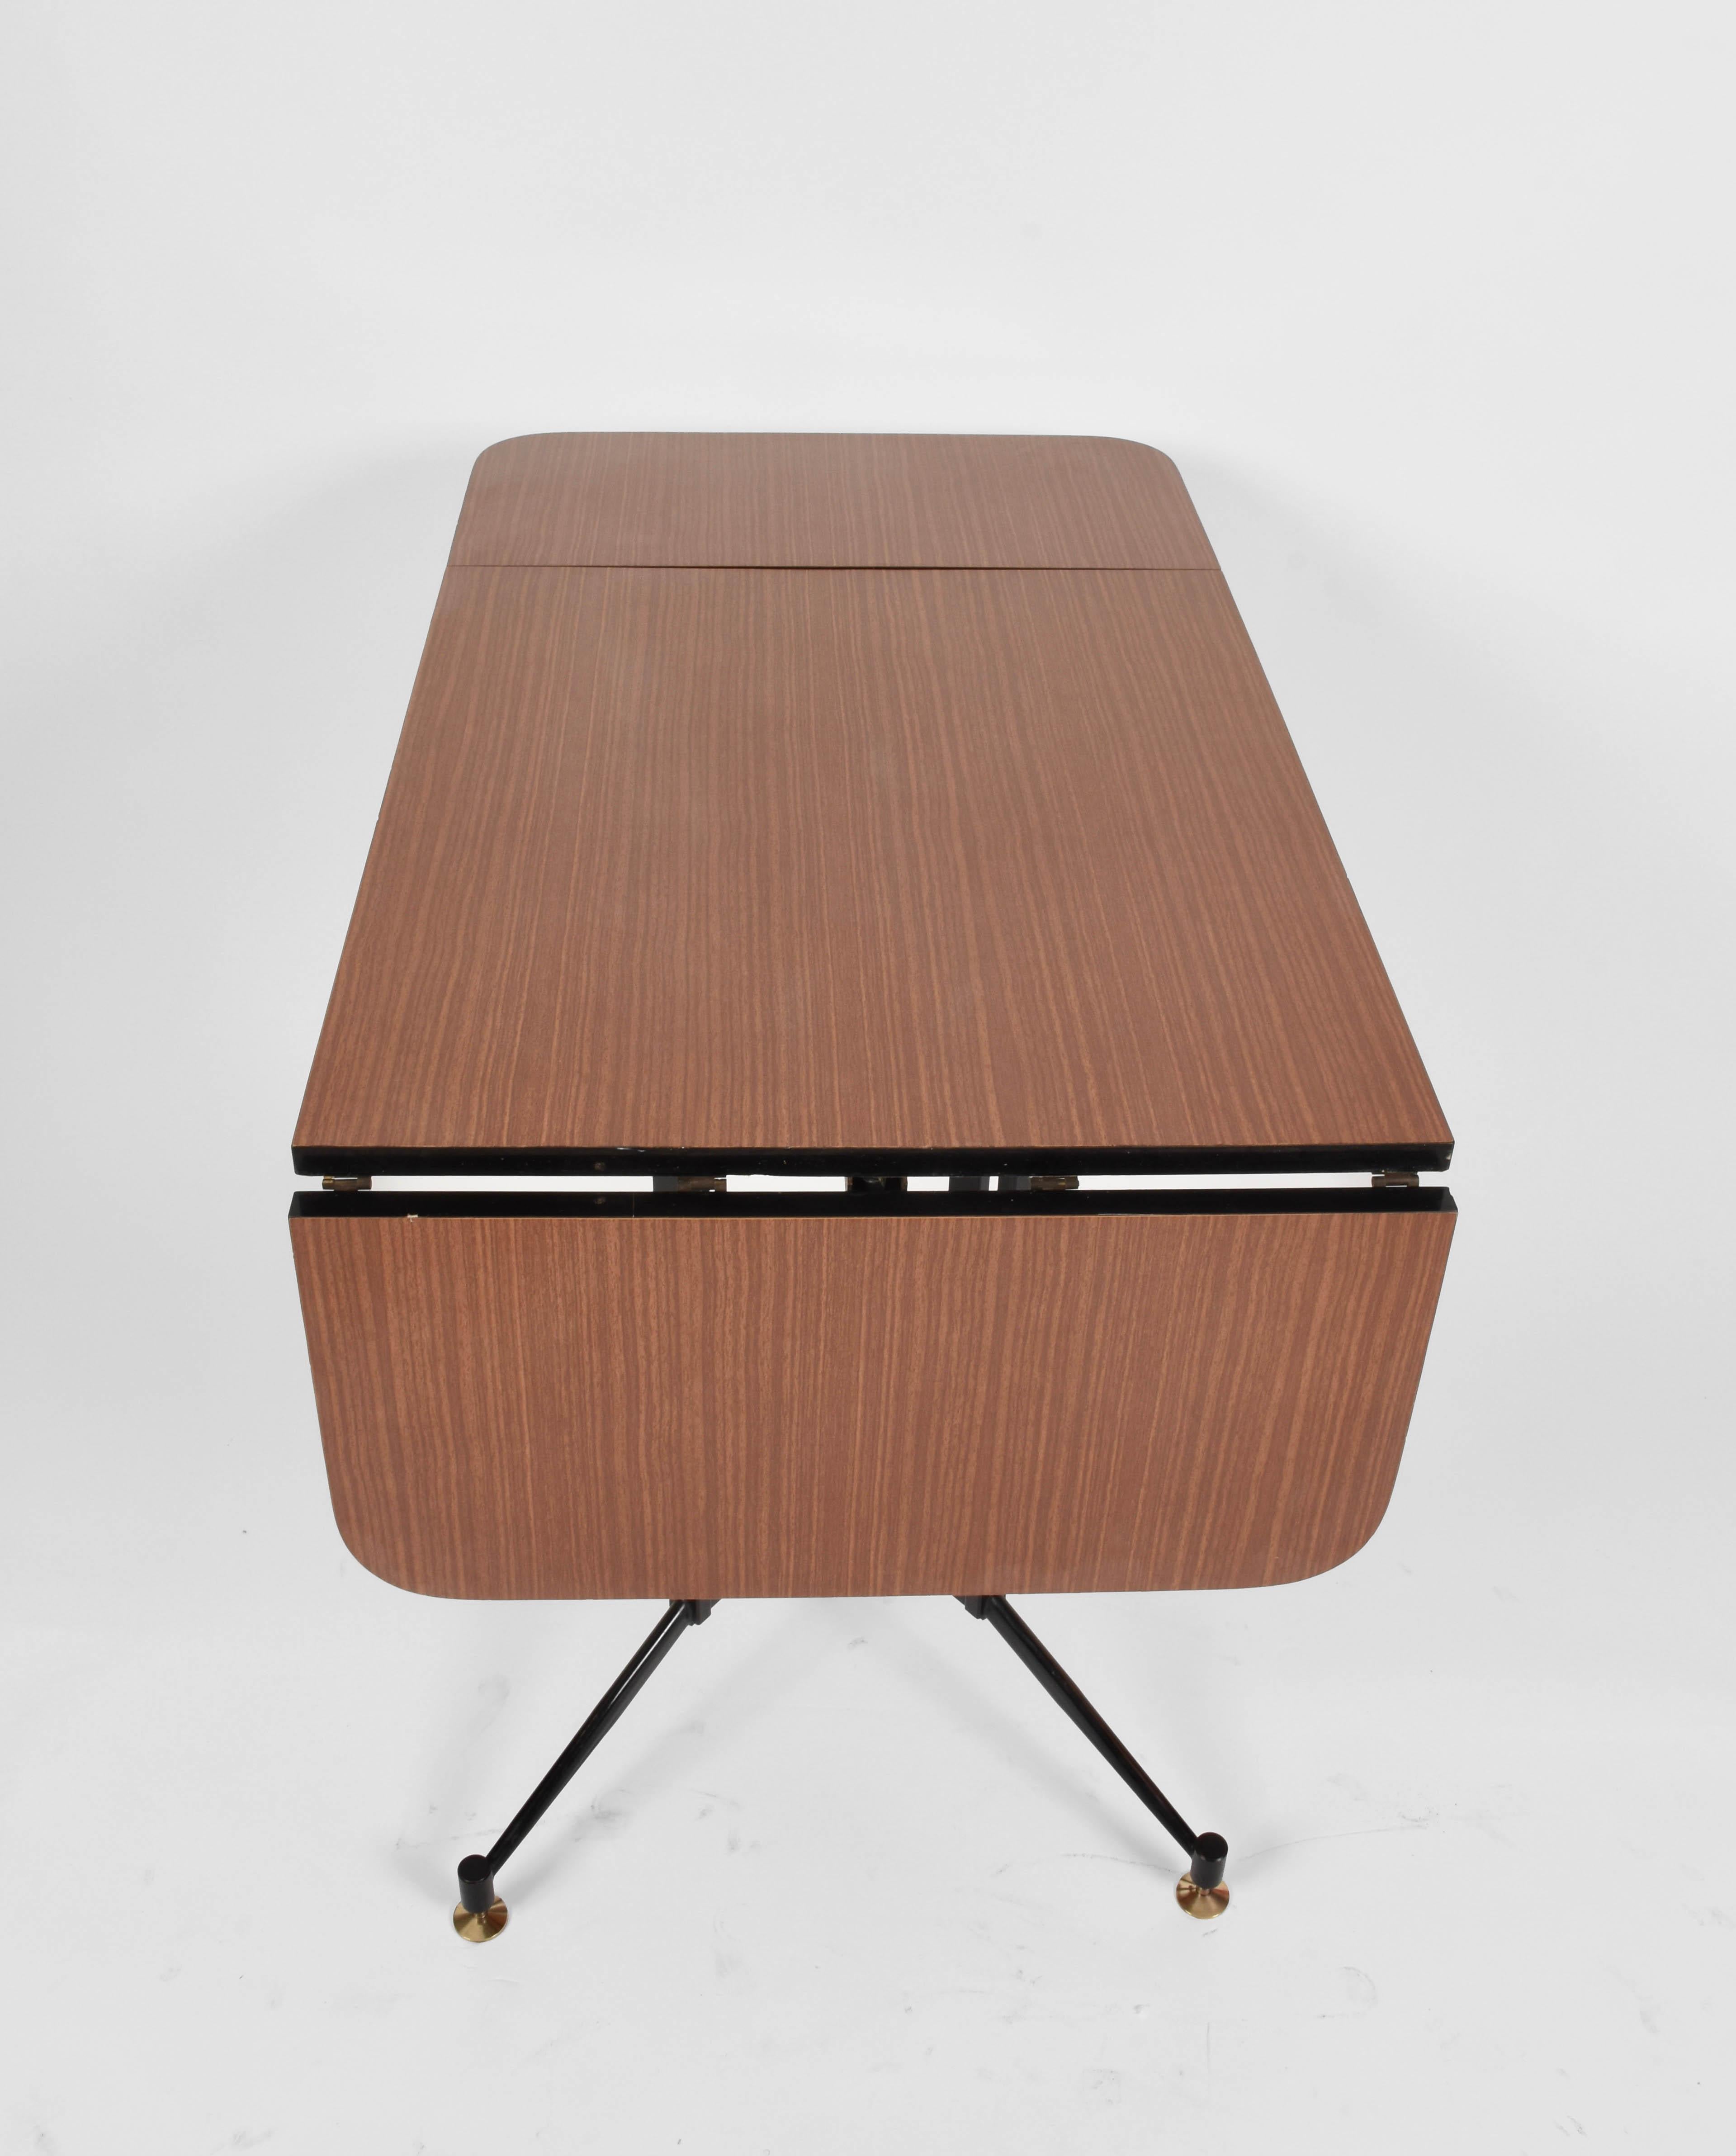 Gardella Midcentury Formica Steel and Brass Table, Laminati Plastici Italy 1950s For Sale 2